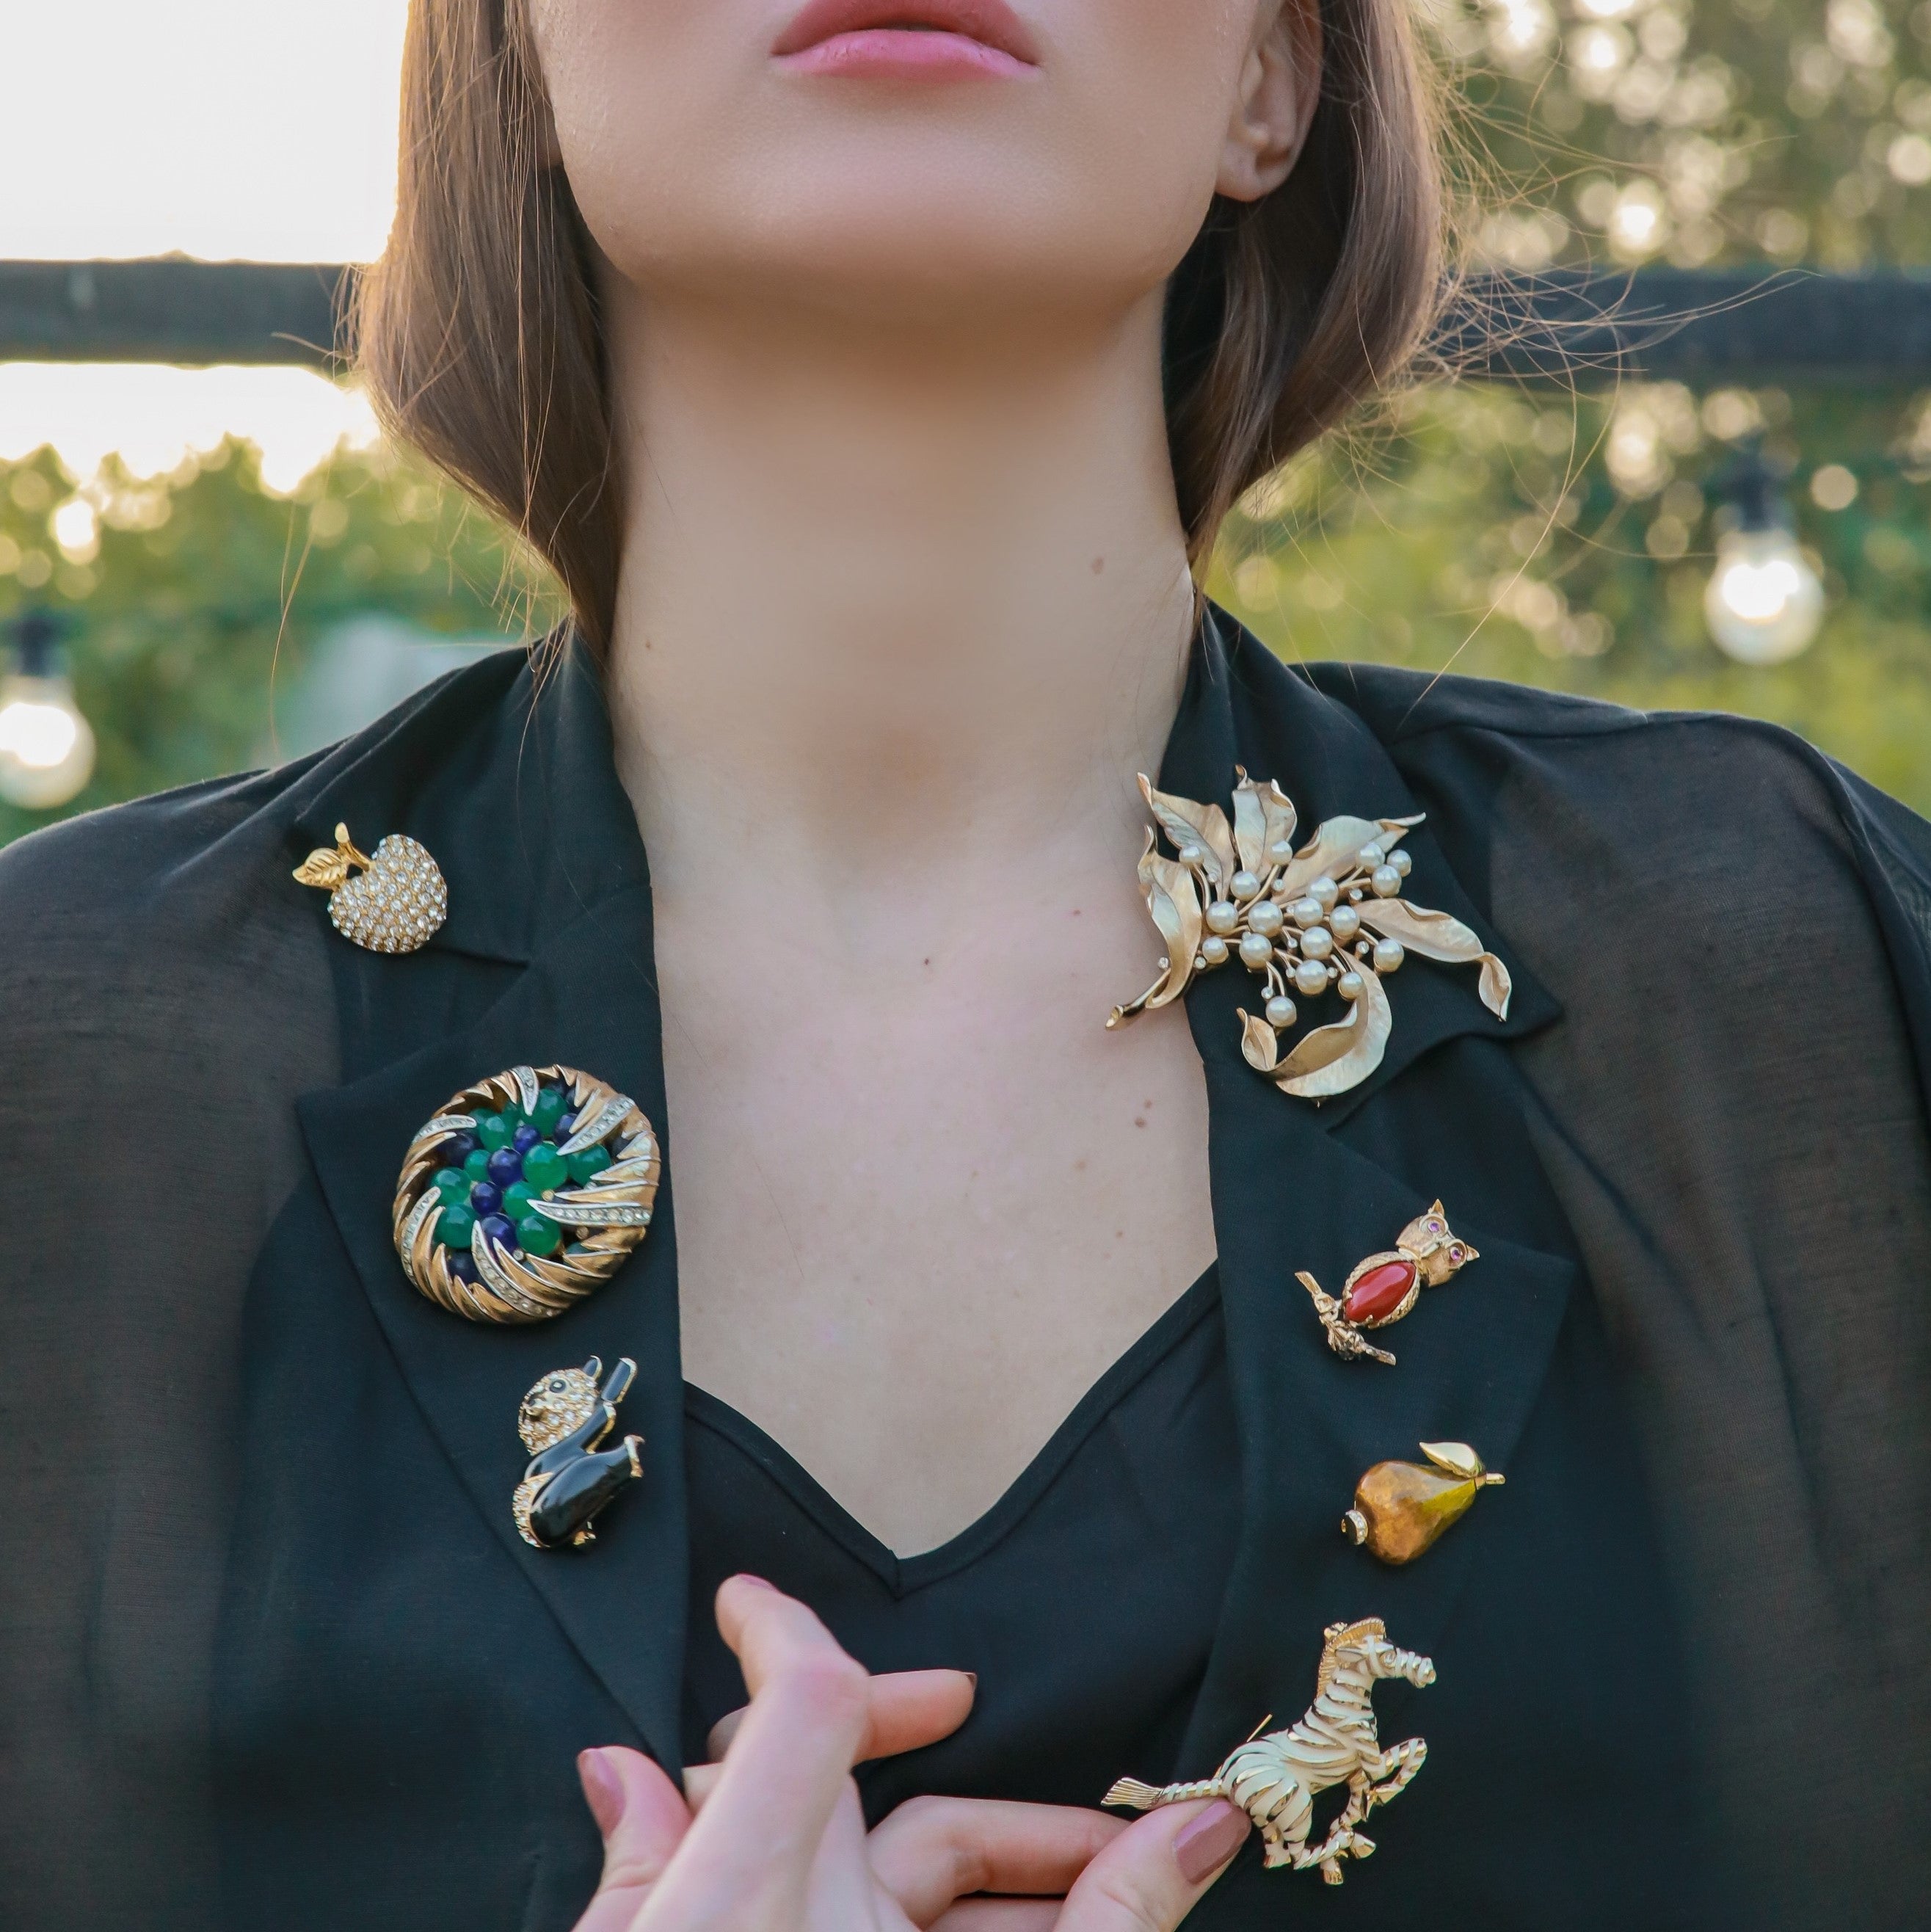 Collection of vintage brooches worn on a woman’s black blazer lapel. 